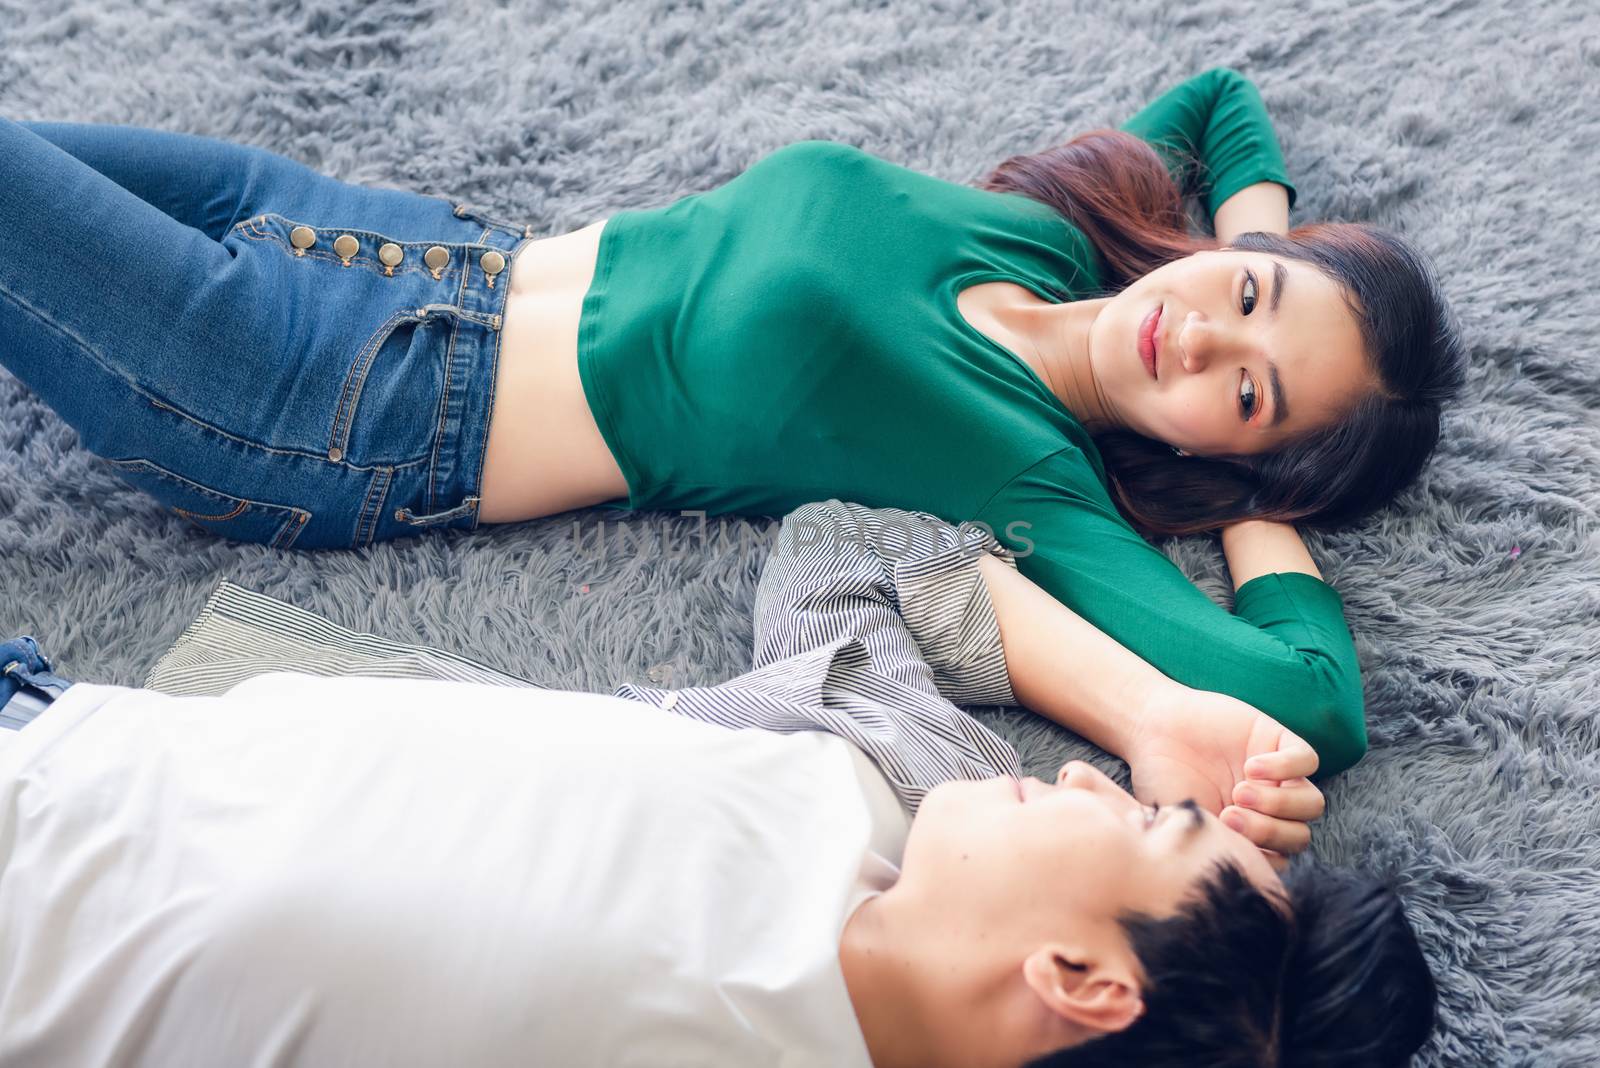 Young Couple Having Relaxing While Lying on Carpet at Their Home, Attractive Asian Couple Love are Relaxed Together on Living Room Flooring. Happy Moments and Lifestyles Concept by MahaHeang245789